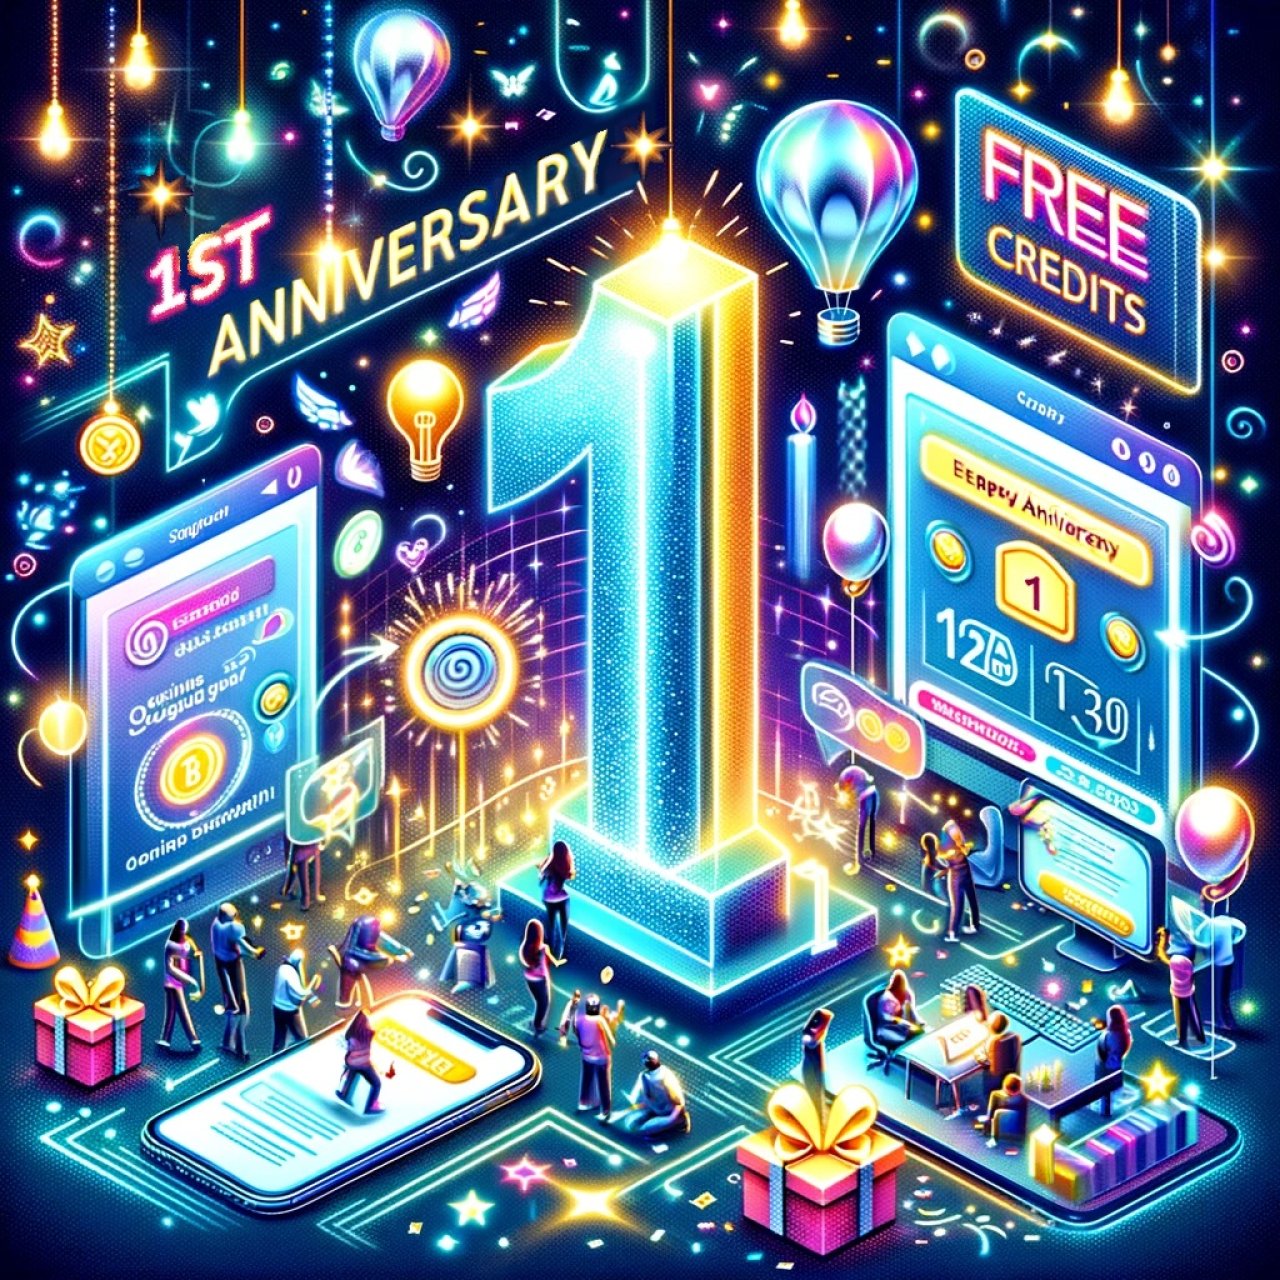 A colorful depiction of a large number 1 amidst signage stating 1st anniversary and free credits.